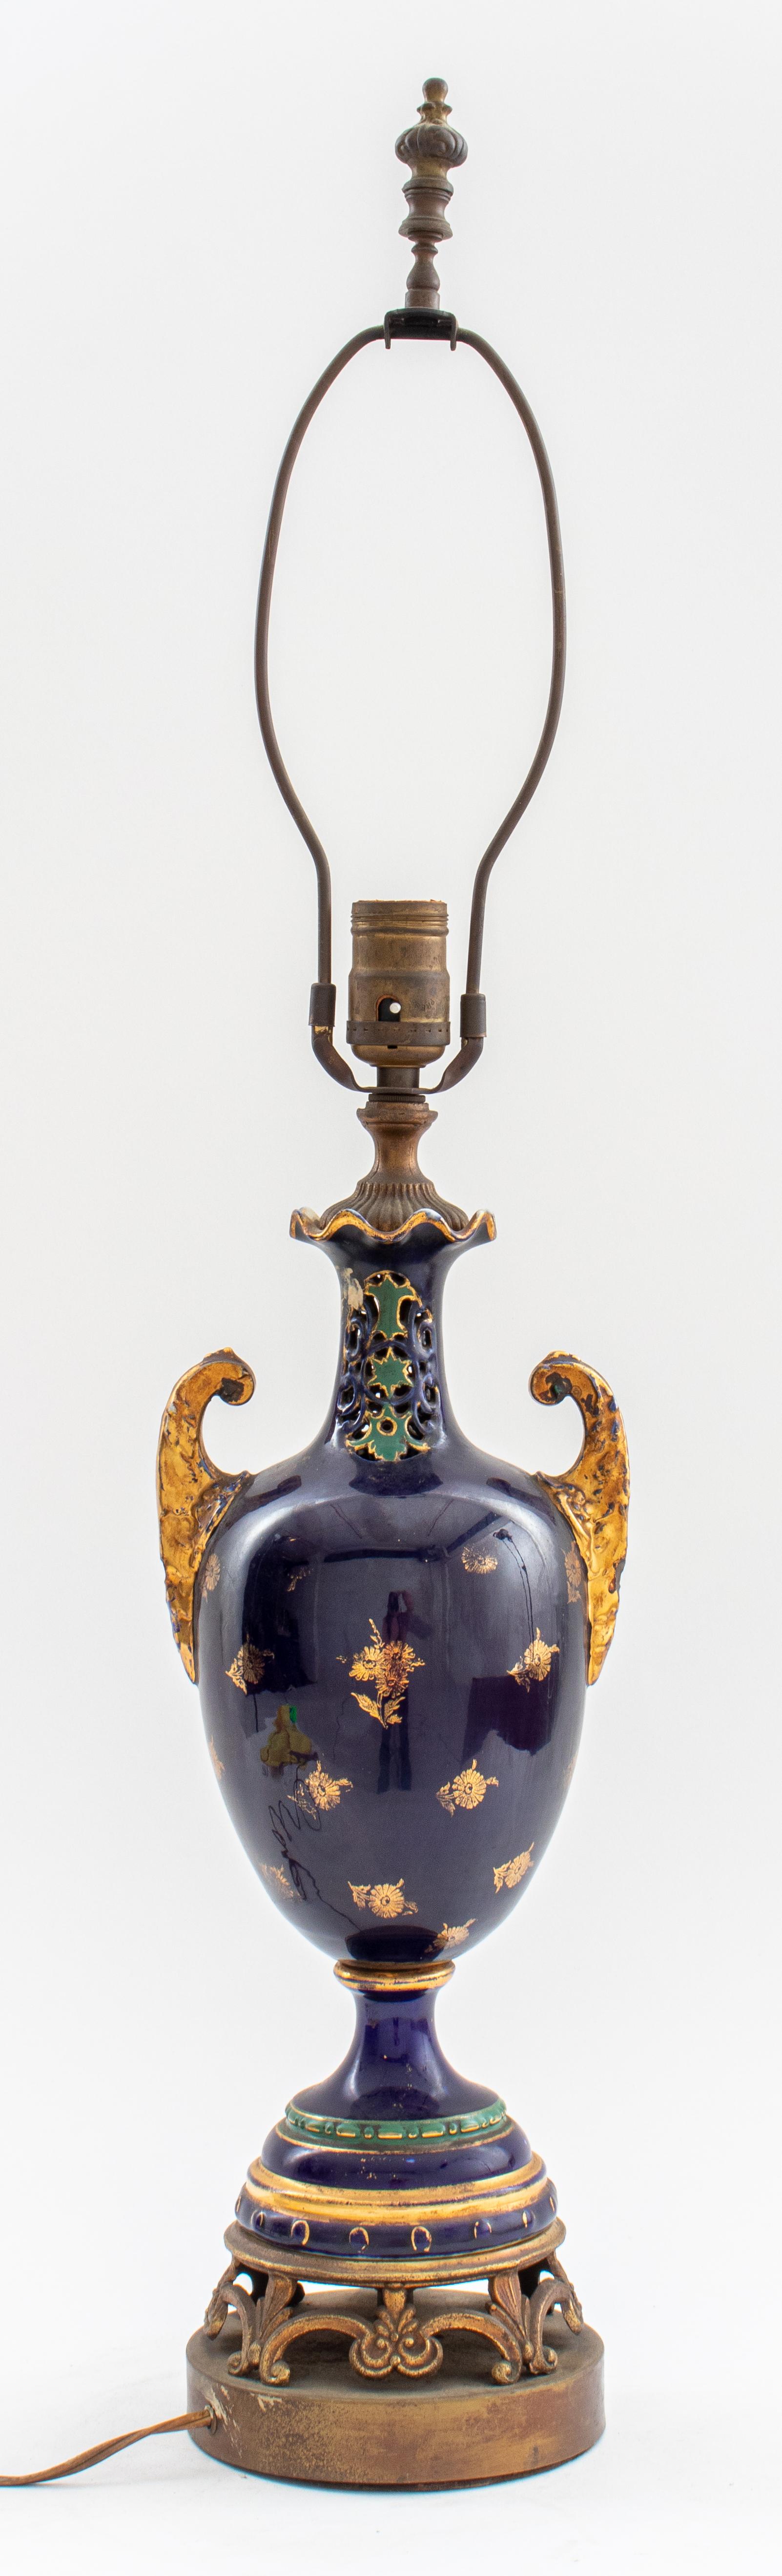 French Provincial Sevres Style Vase Mounted as a Lamp